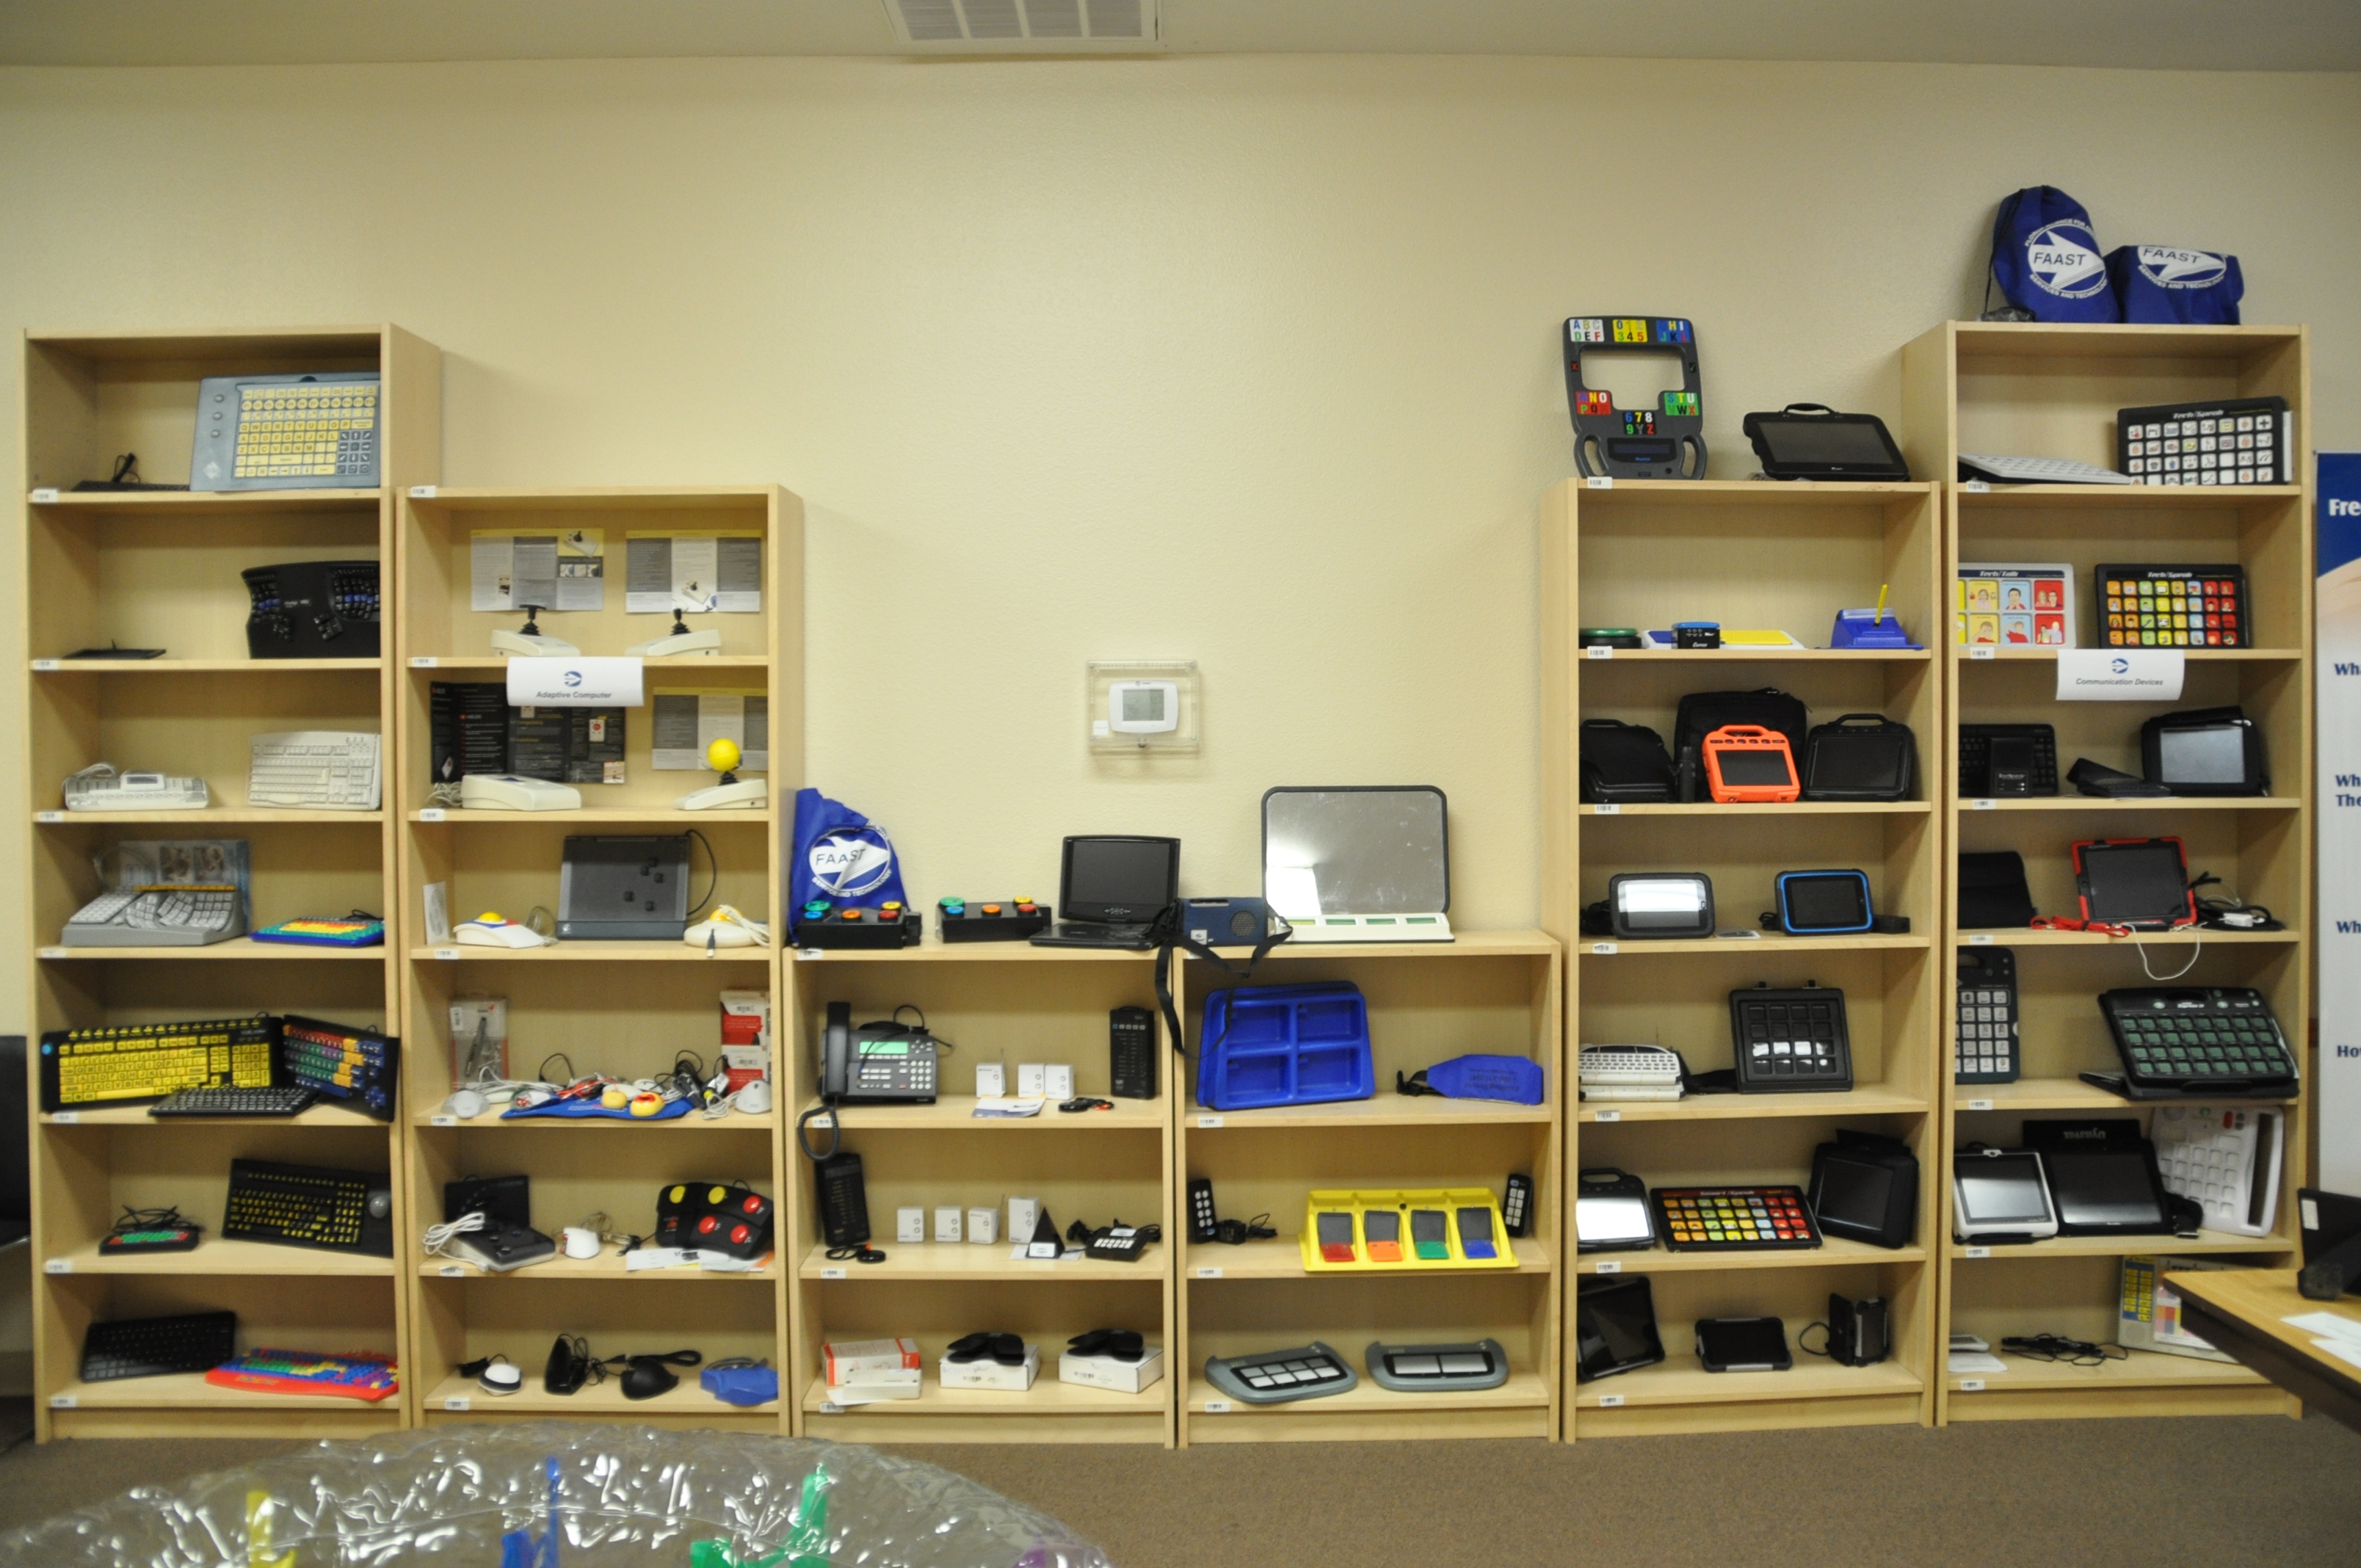 Some of the assistive devices FAAST has in their Tallahassee showroom.